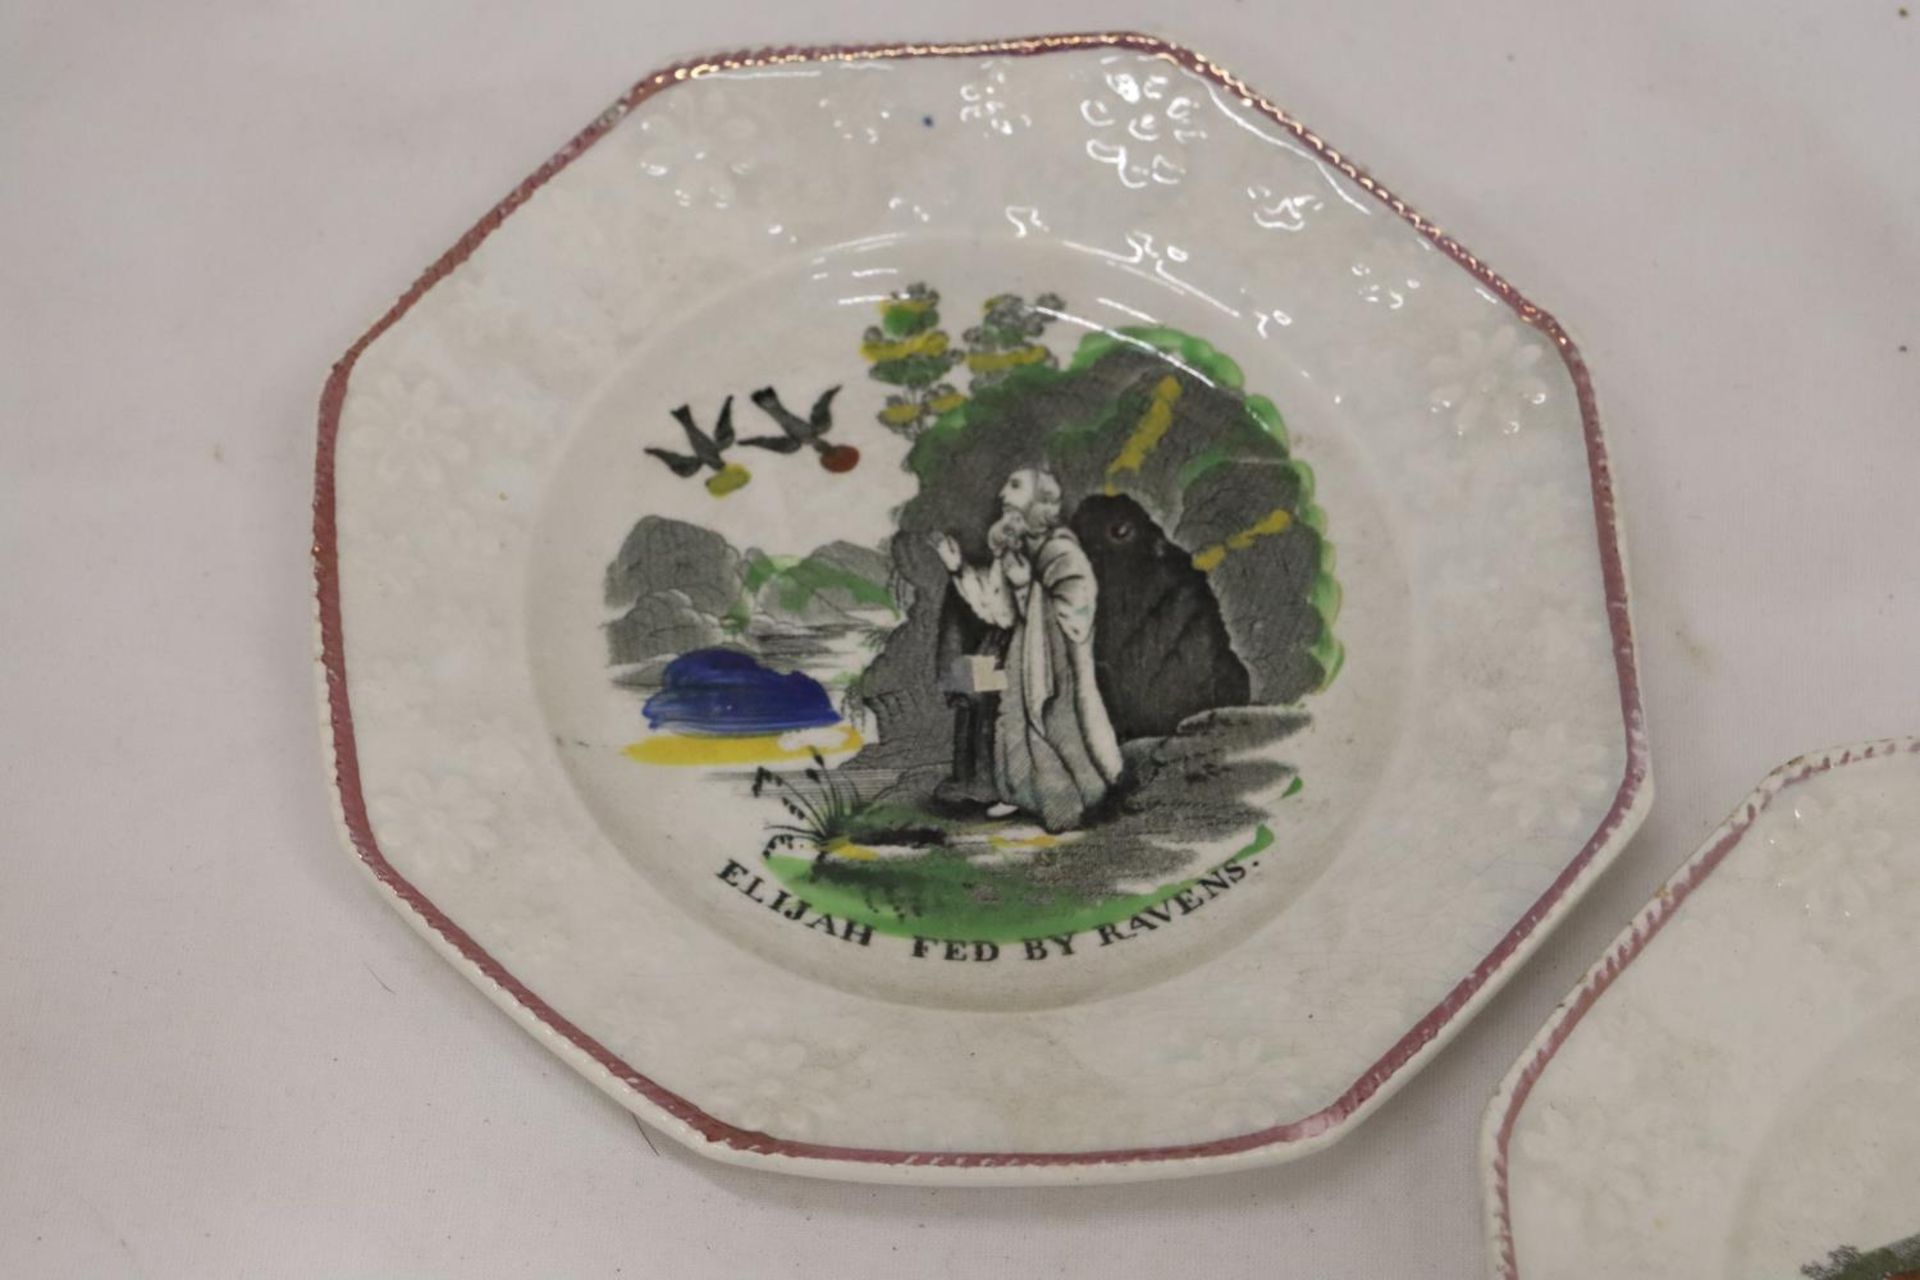 TWO 19TH CENTURY PEARL WARE CHILD'S PLATES - Image 2 of 5